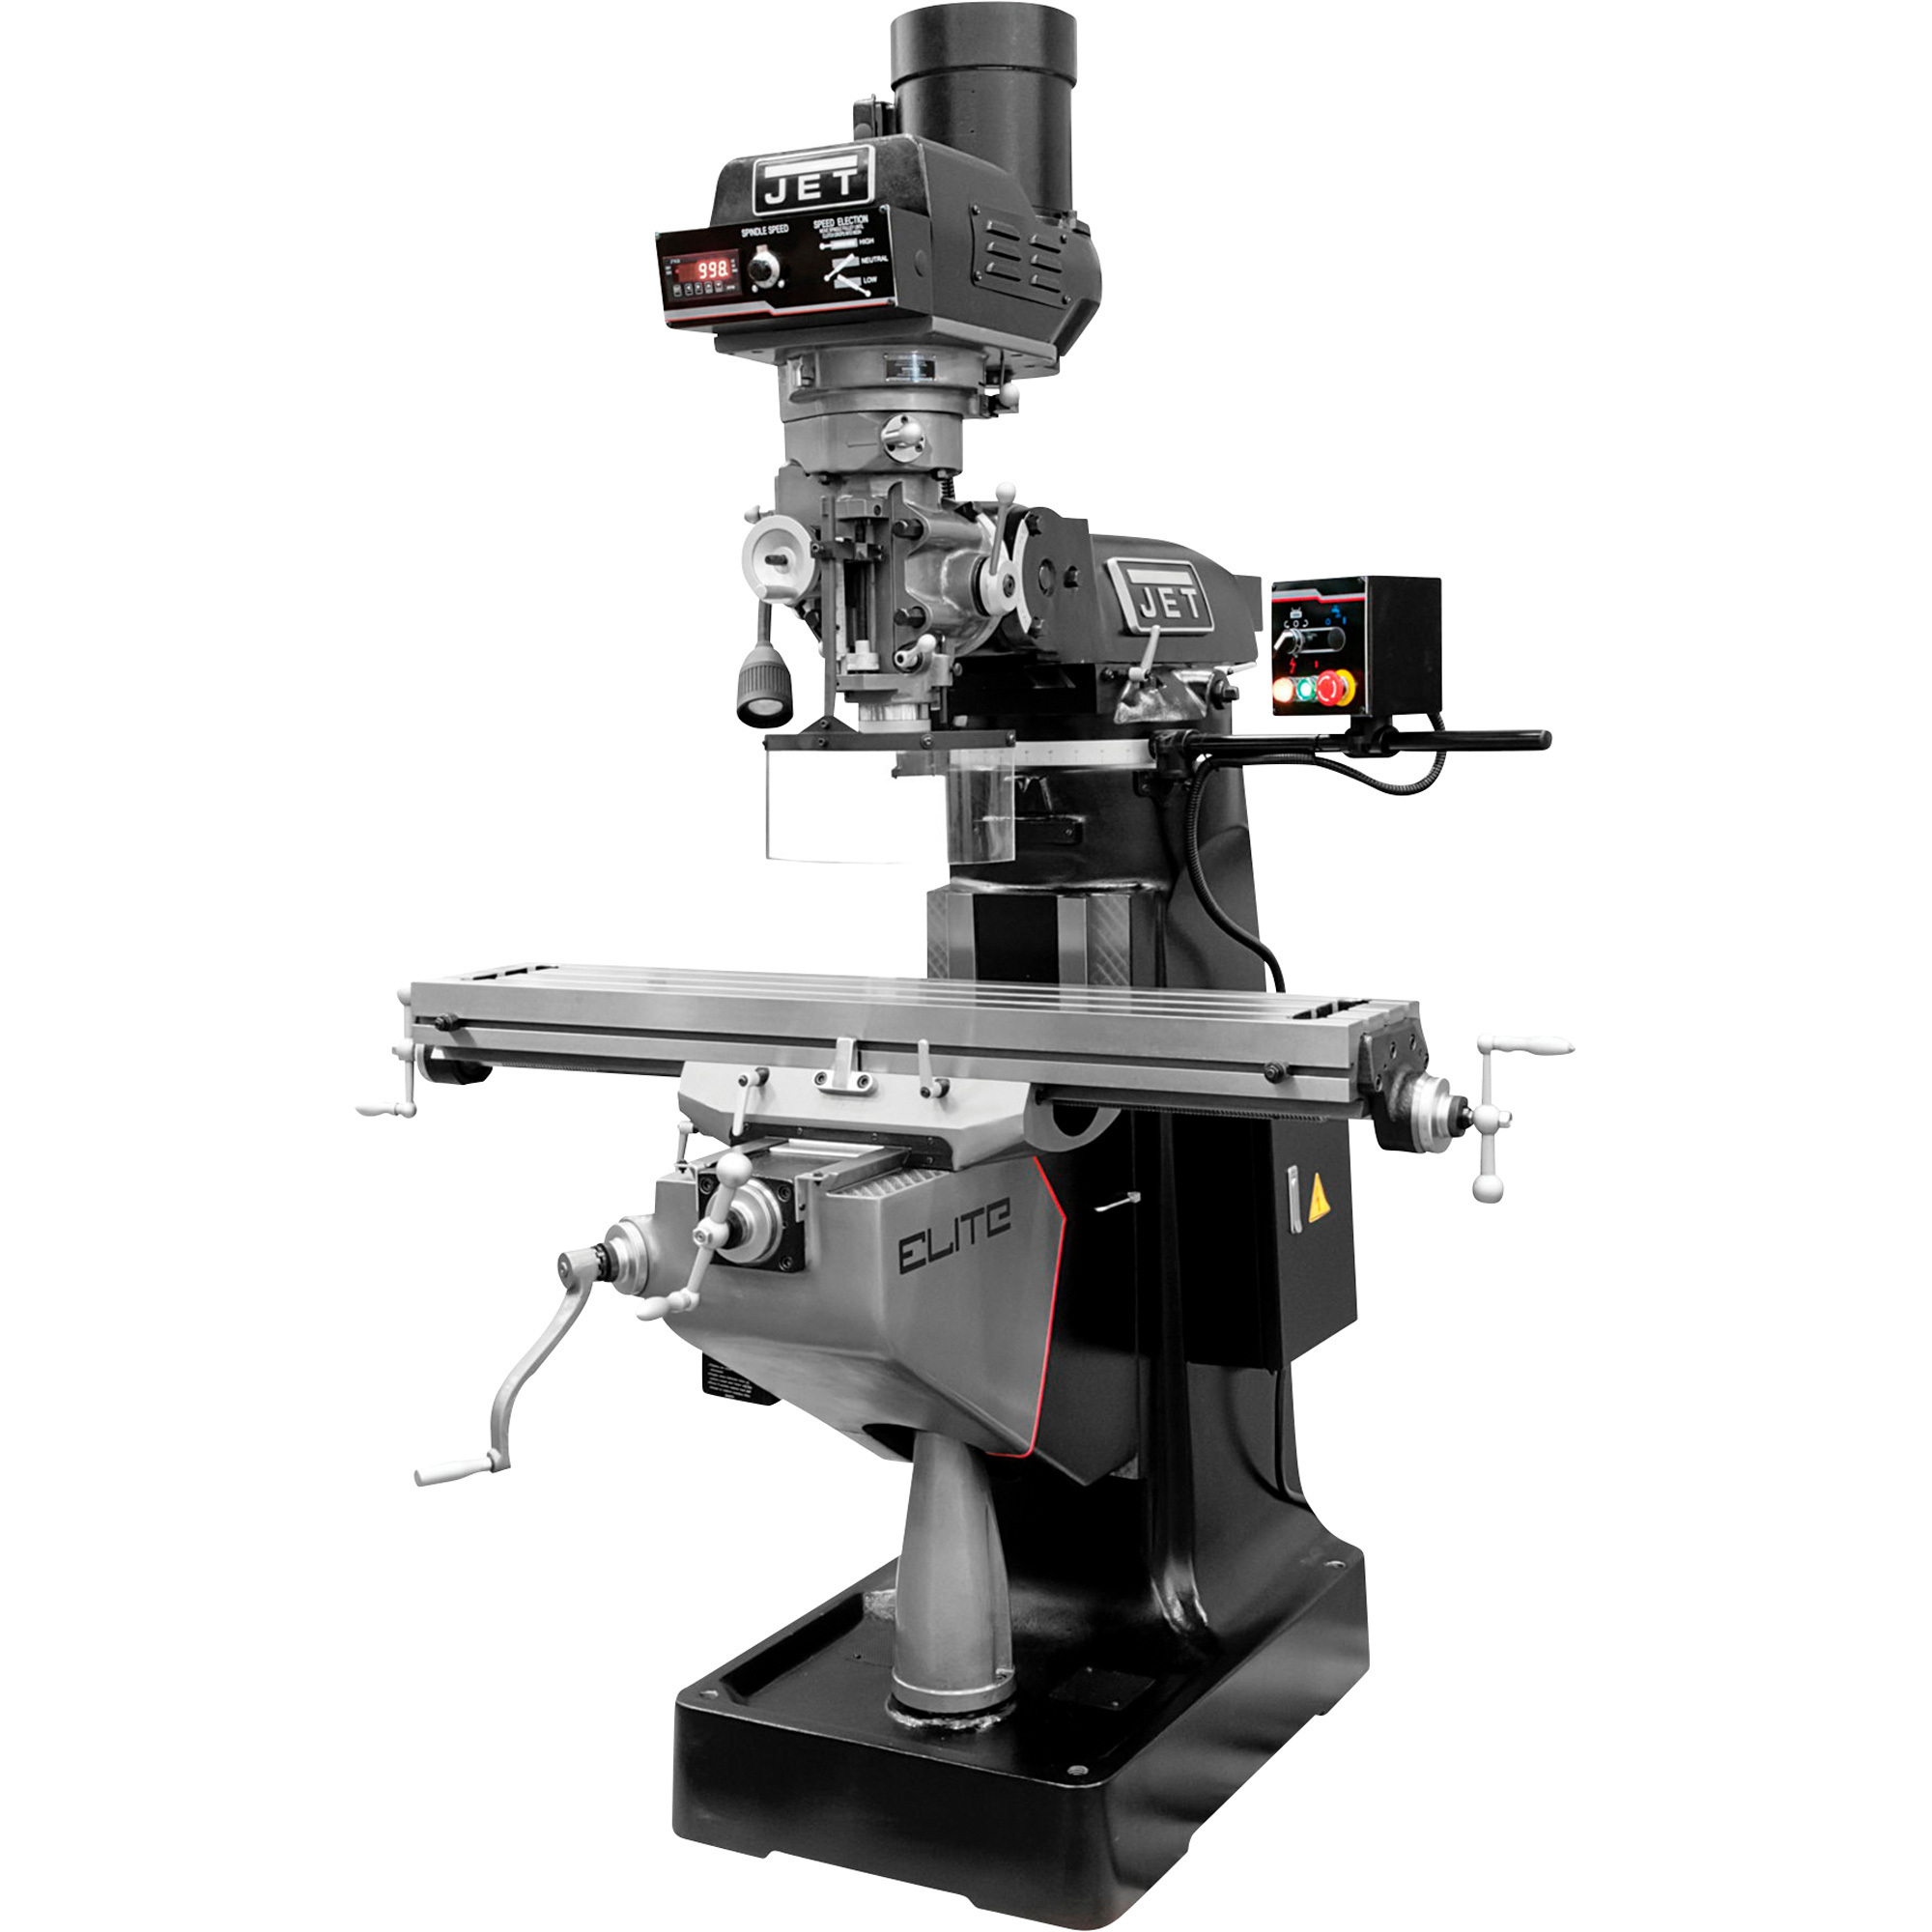 JET Elite Metalworking Mill with 3-Axis ACU-RITE 303 (Quill) DRO, Servo X, Y, Z-Axis Powerfeeds and USA Air Powered Draw Bar — Model EVS-949 -  894410